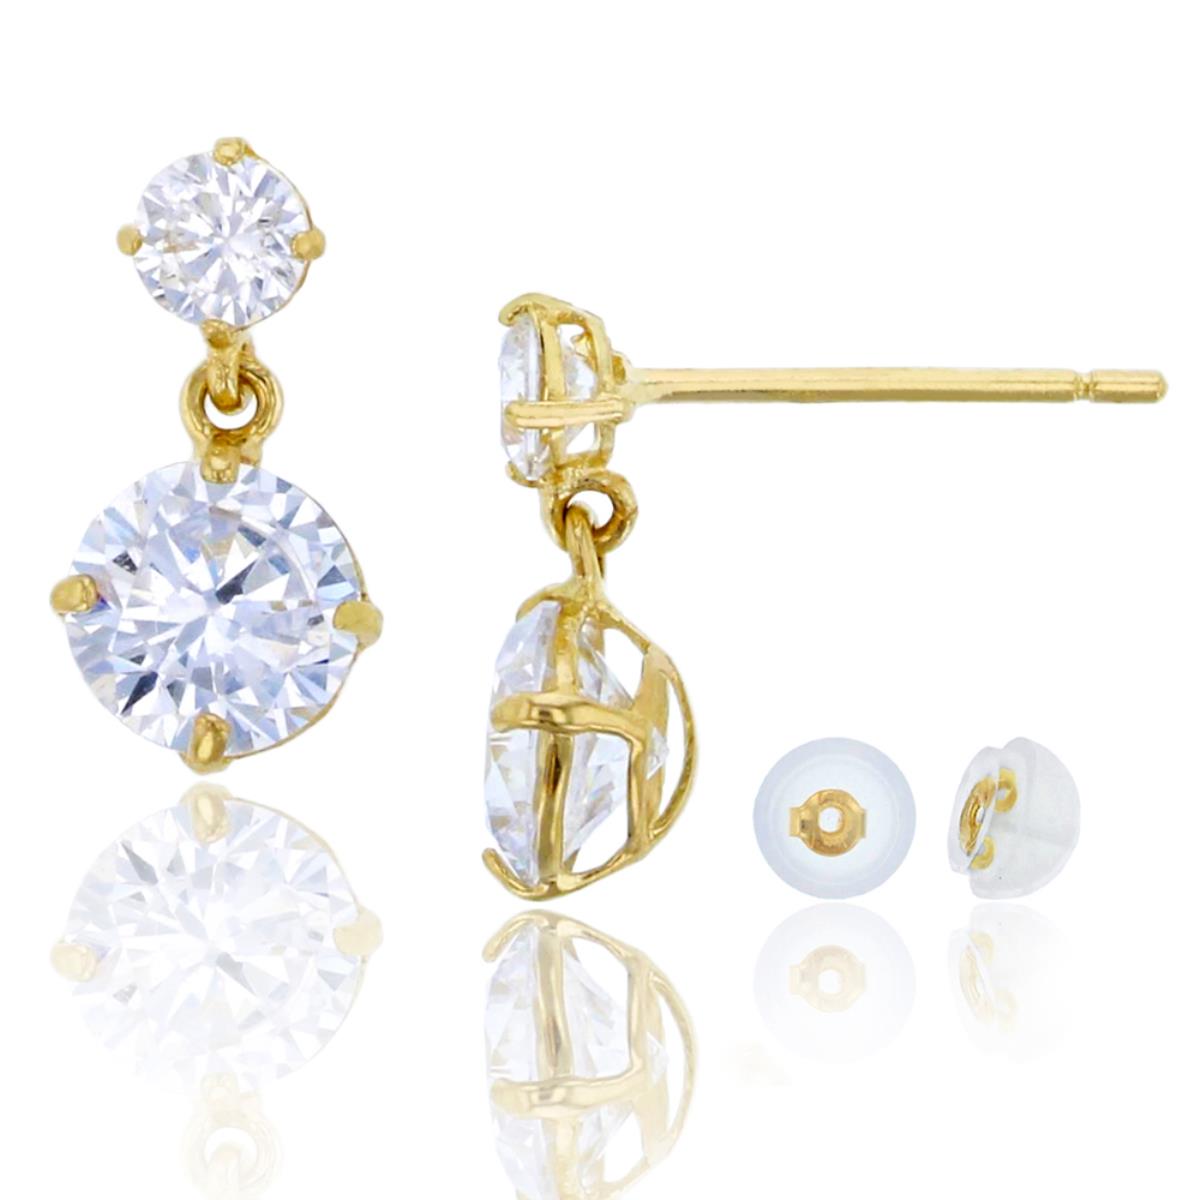 10K Yellow Gold 5mm and 3mm Double Solitaire Dangling Stud Earring & 10K Silicone Back